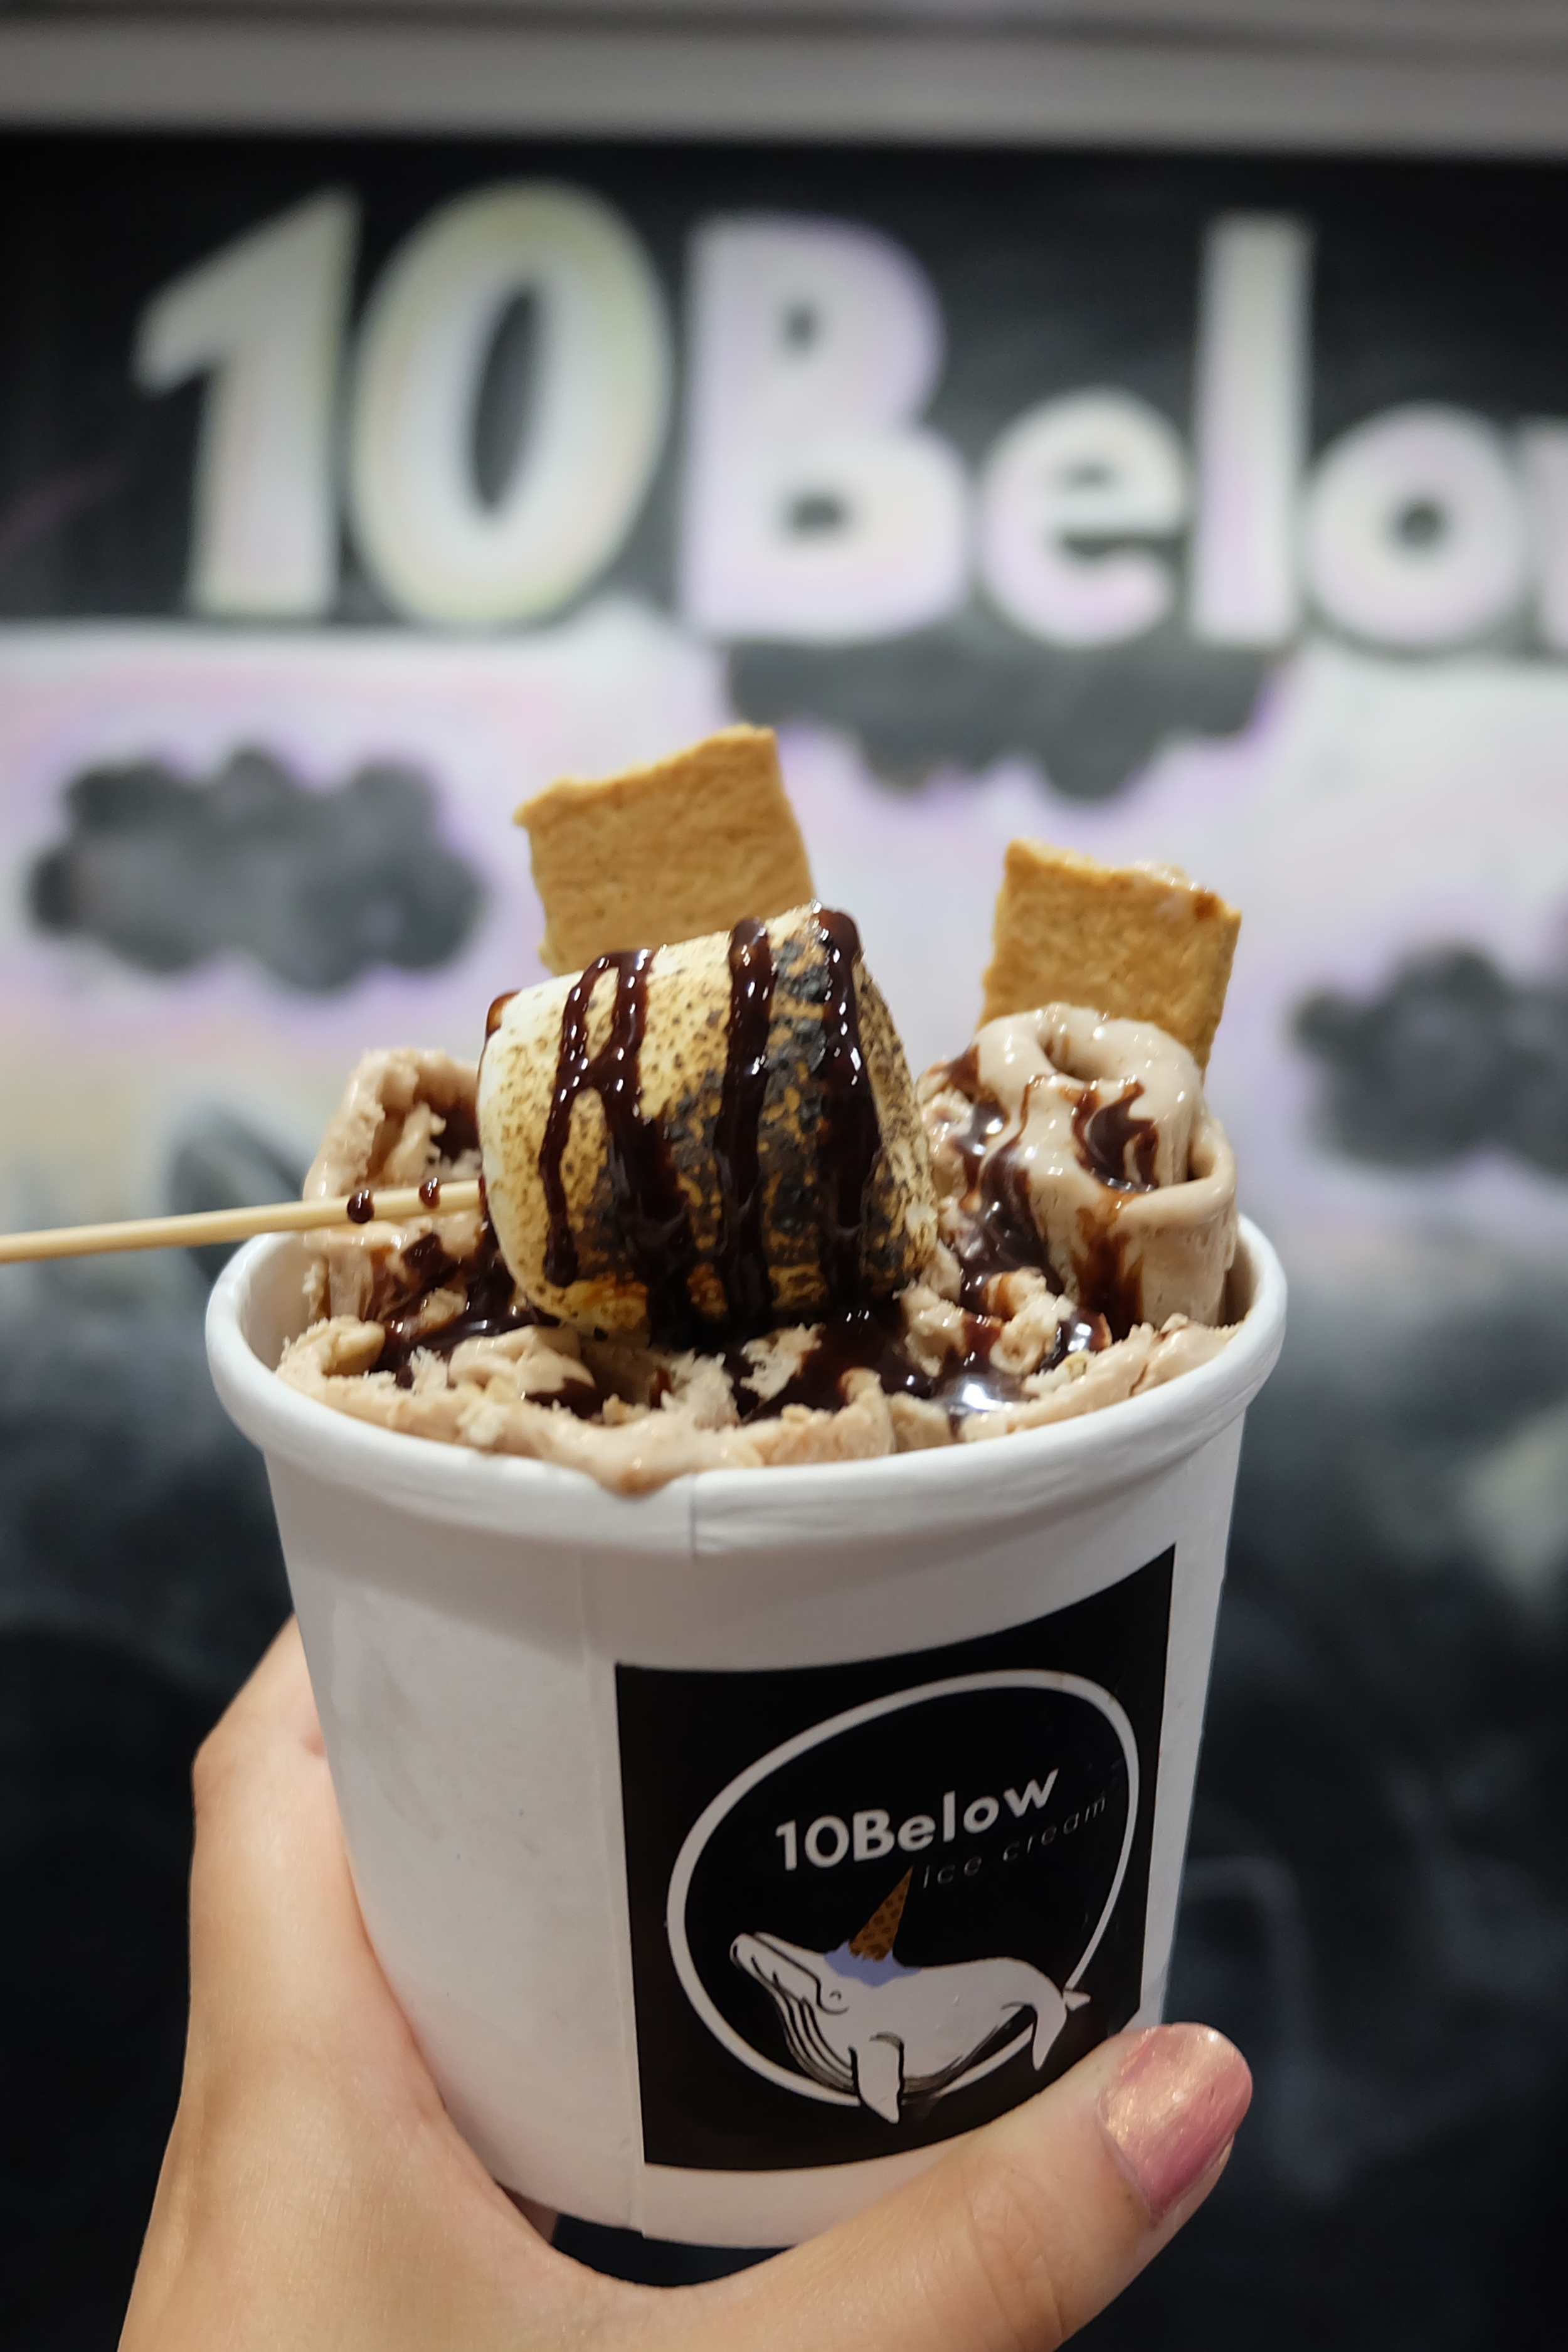 6. 10Below: 10Below Ice Cream is one of the only places in New York where you can get Thai-inspired ice cream rolls. This made-to-order ice cream is an experience! When your name is called, you can watch as the cream is poured onto a frosted plate of 